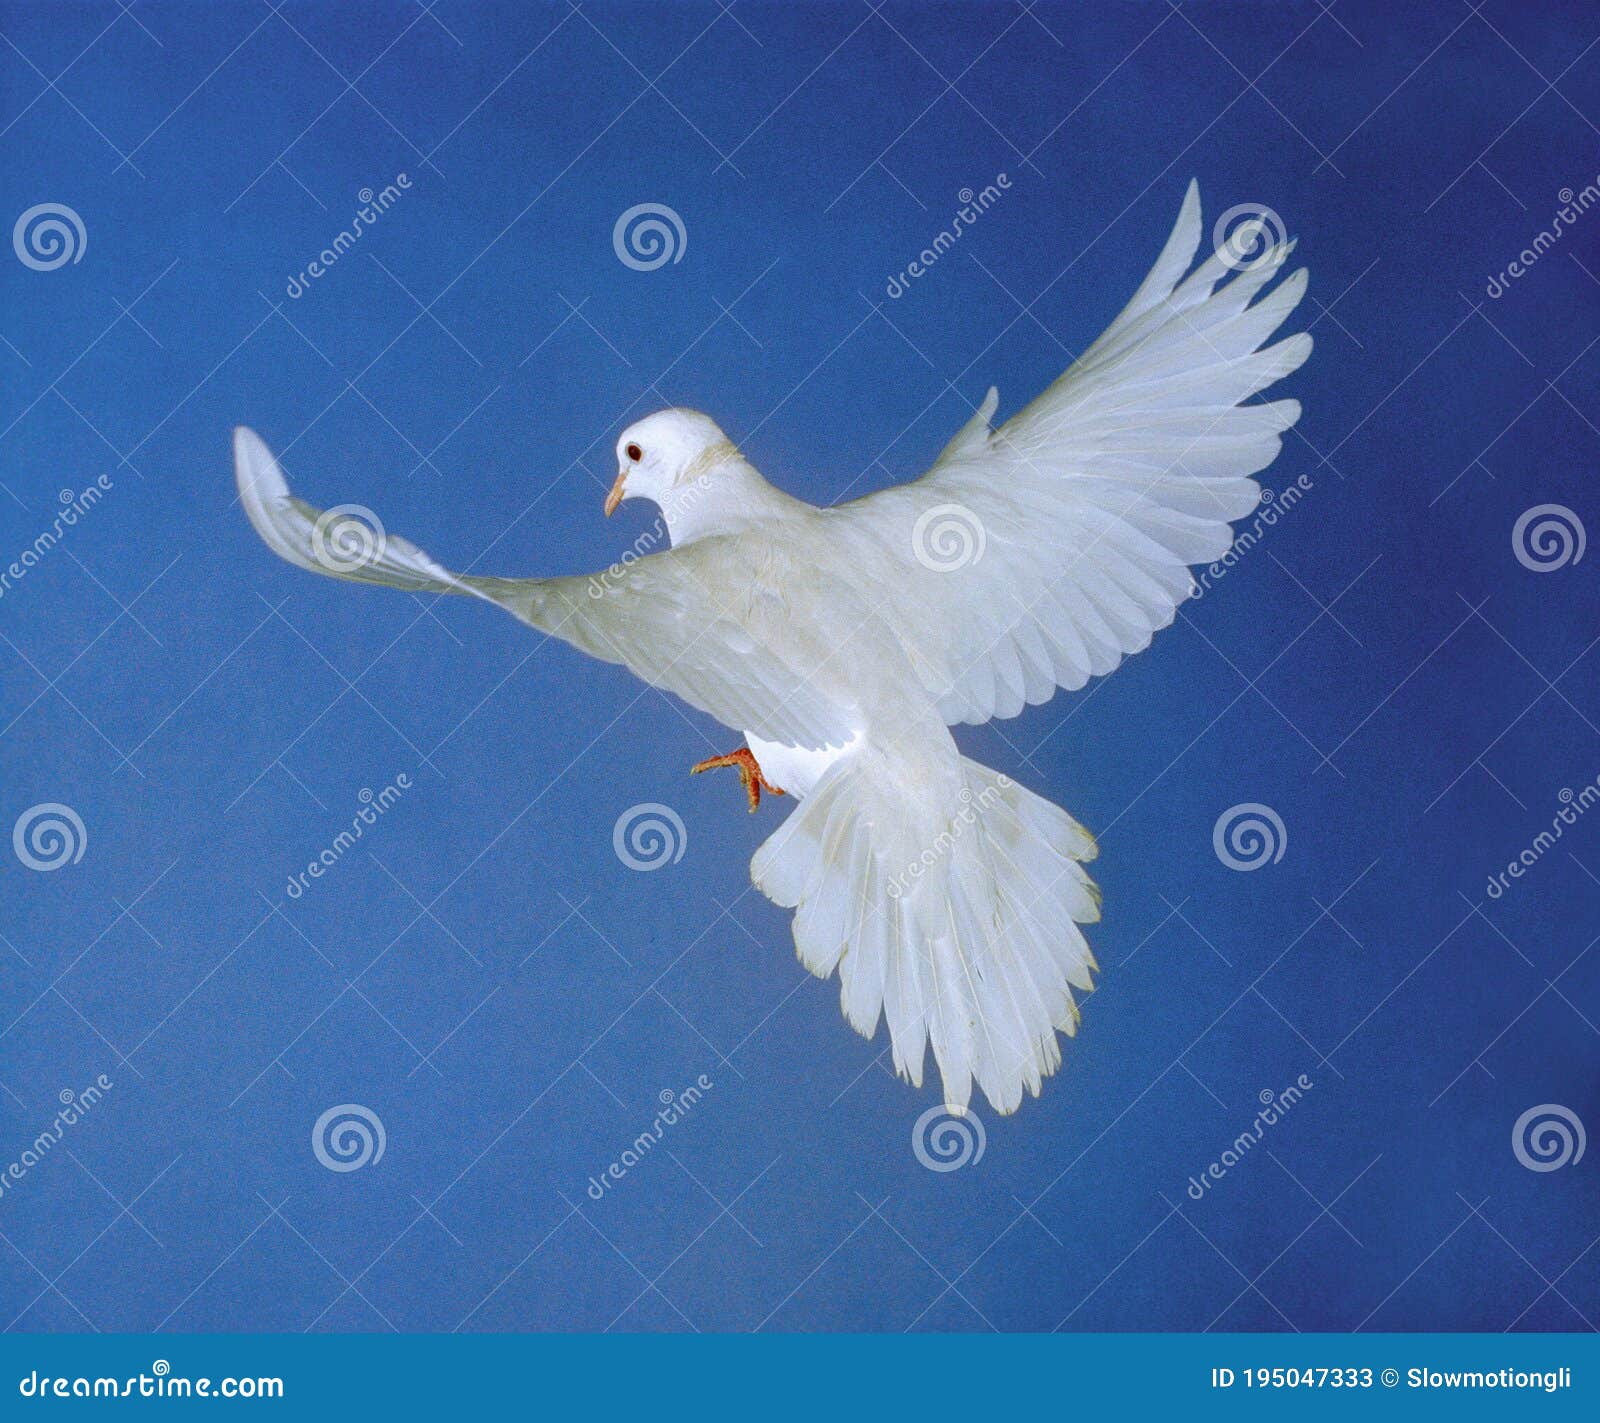 White Dove Adult In Flight Against Blue Sky Stock Image Image Of